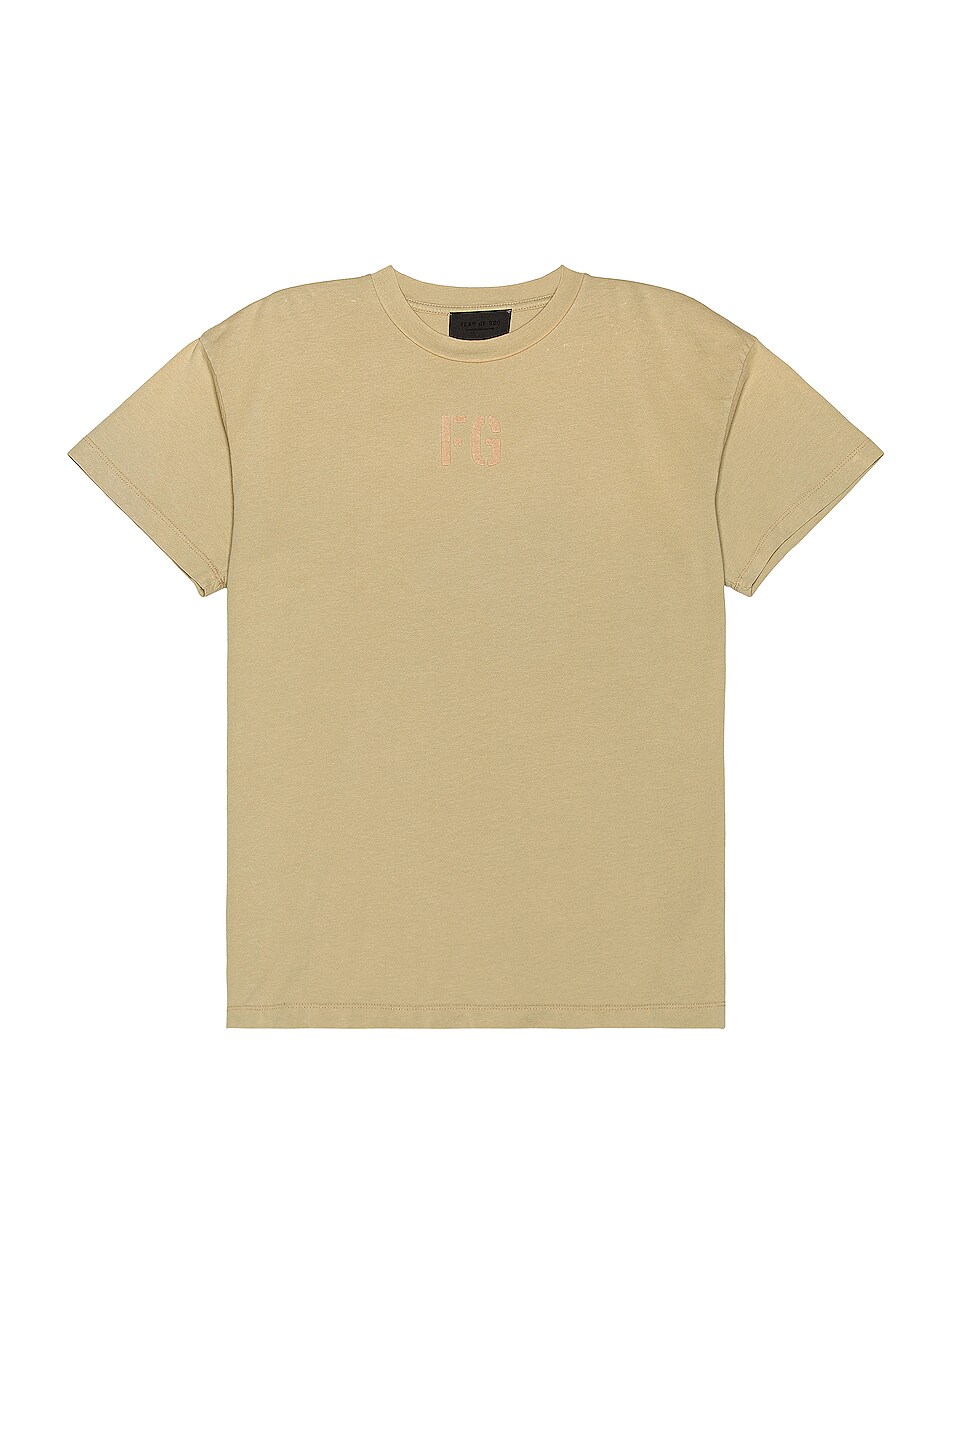 Image 1 of Fear of God FG Tee in Vintage Matcha